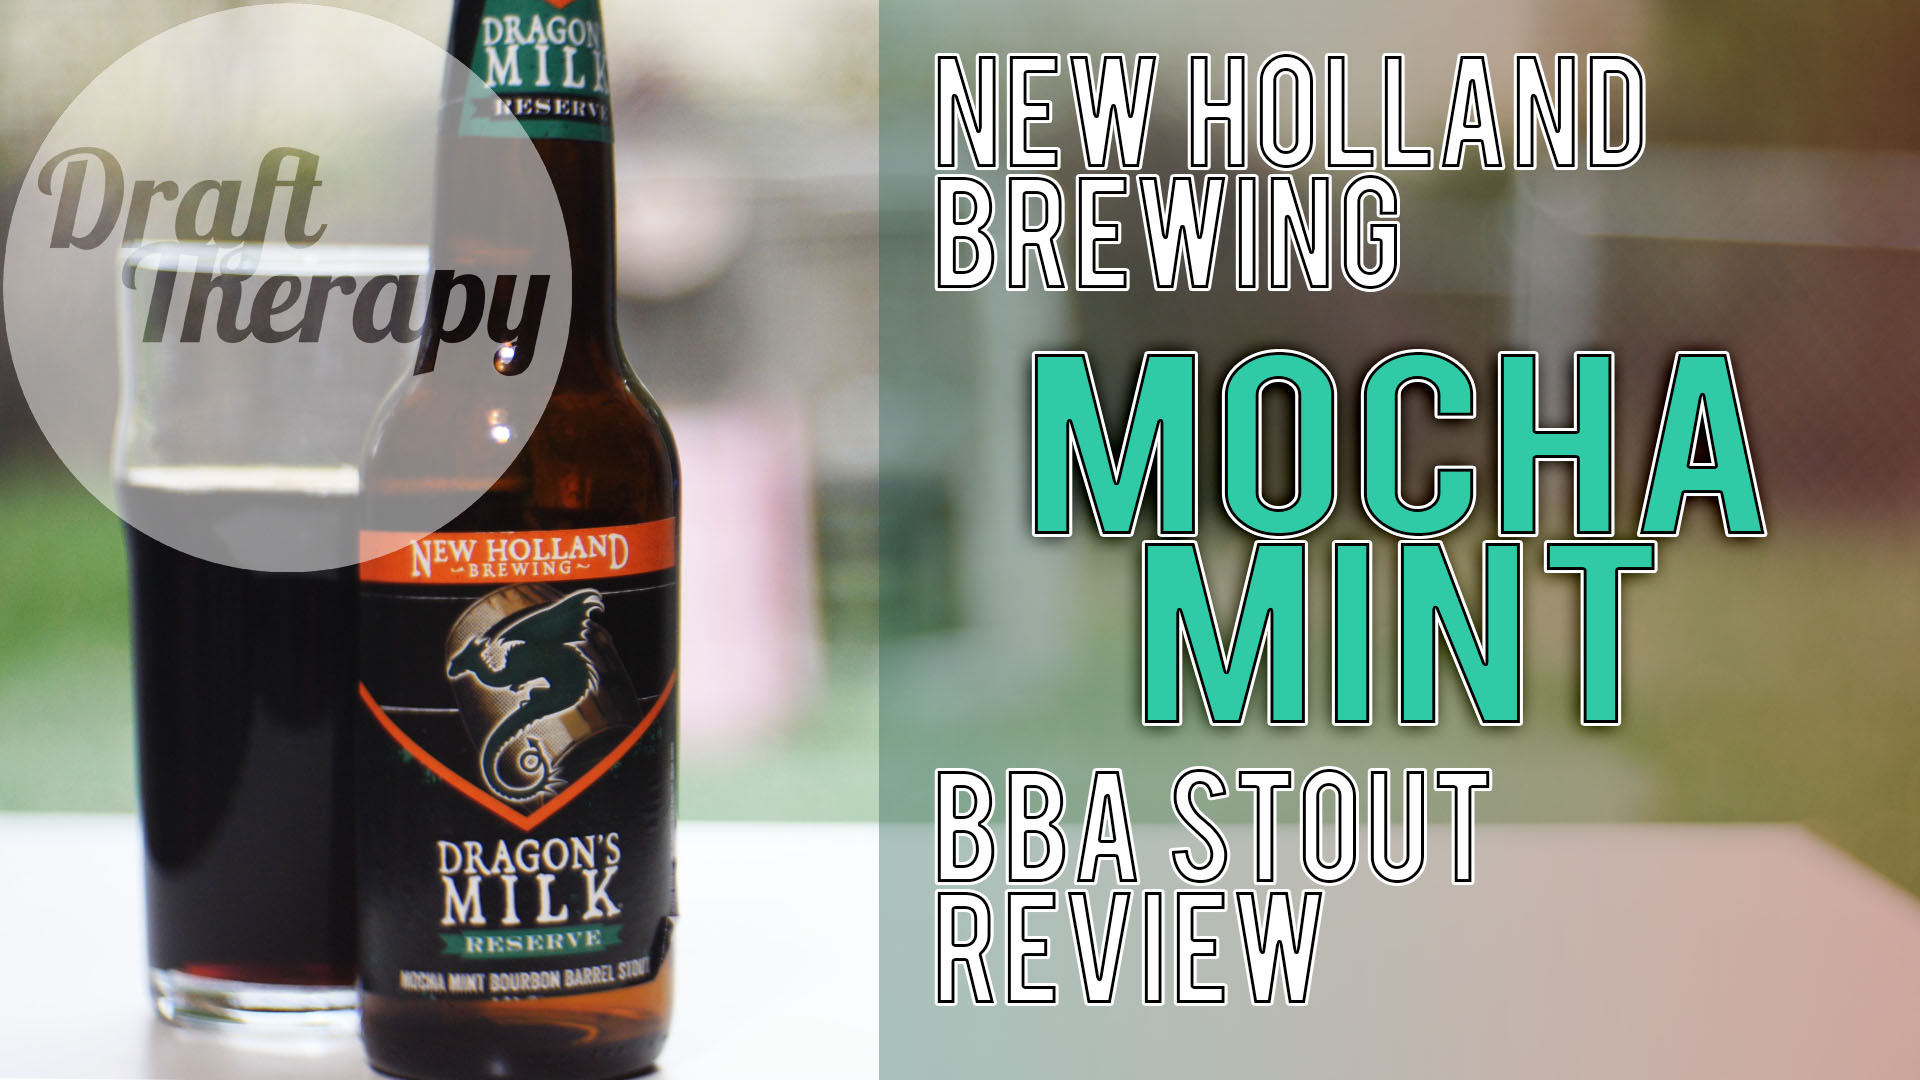 You are currently viewing New Holland Brewing’s Dragon’s Milk Reserve – Mocha Mint